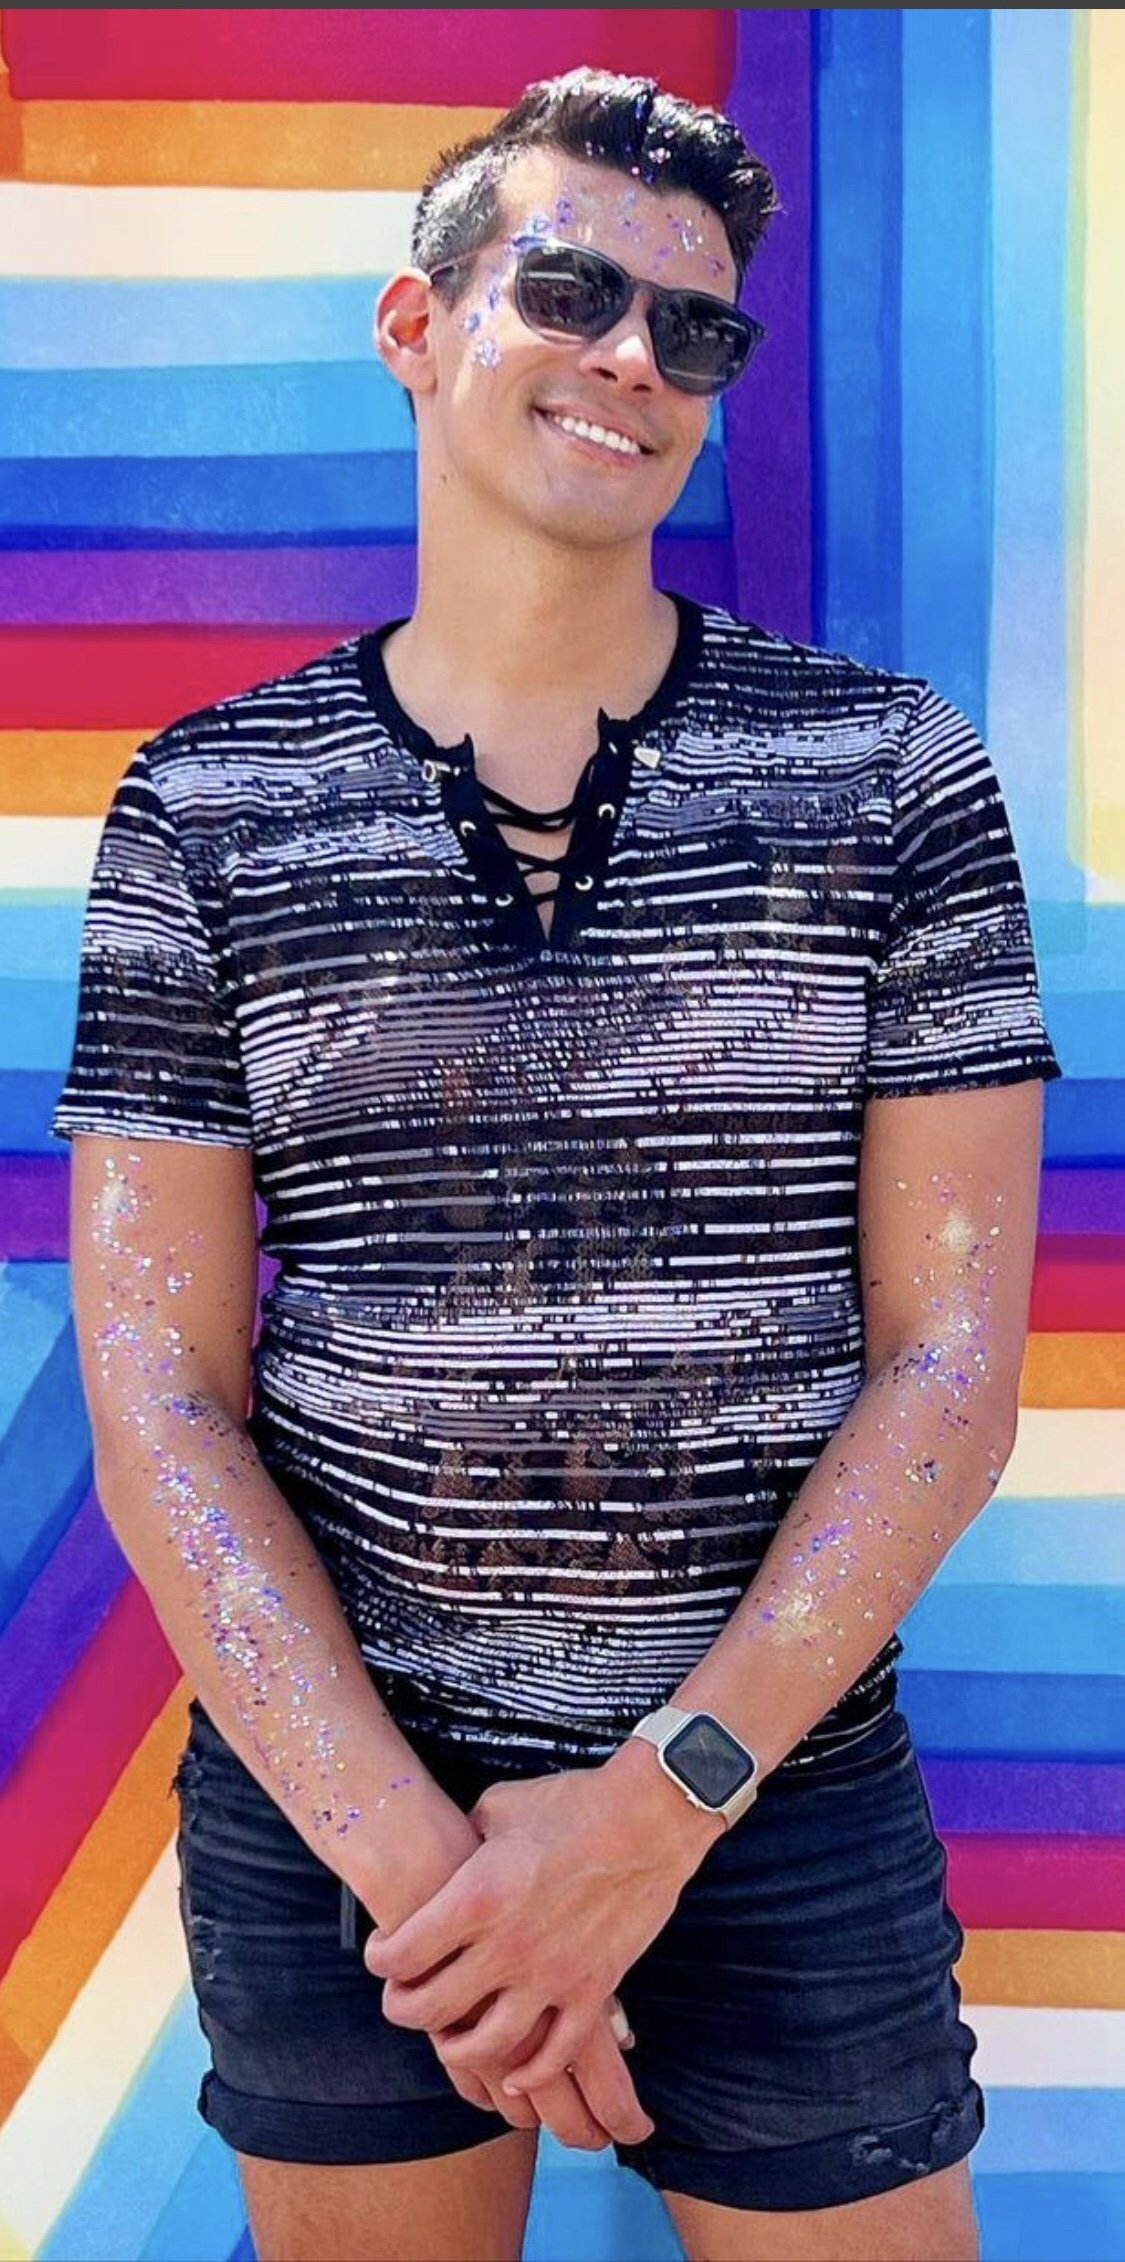 Face and Body Glitter for Festival NYC.jpg